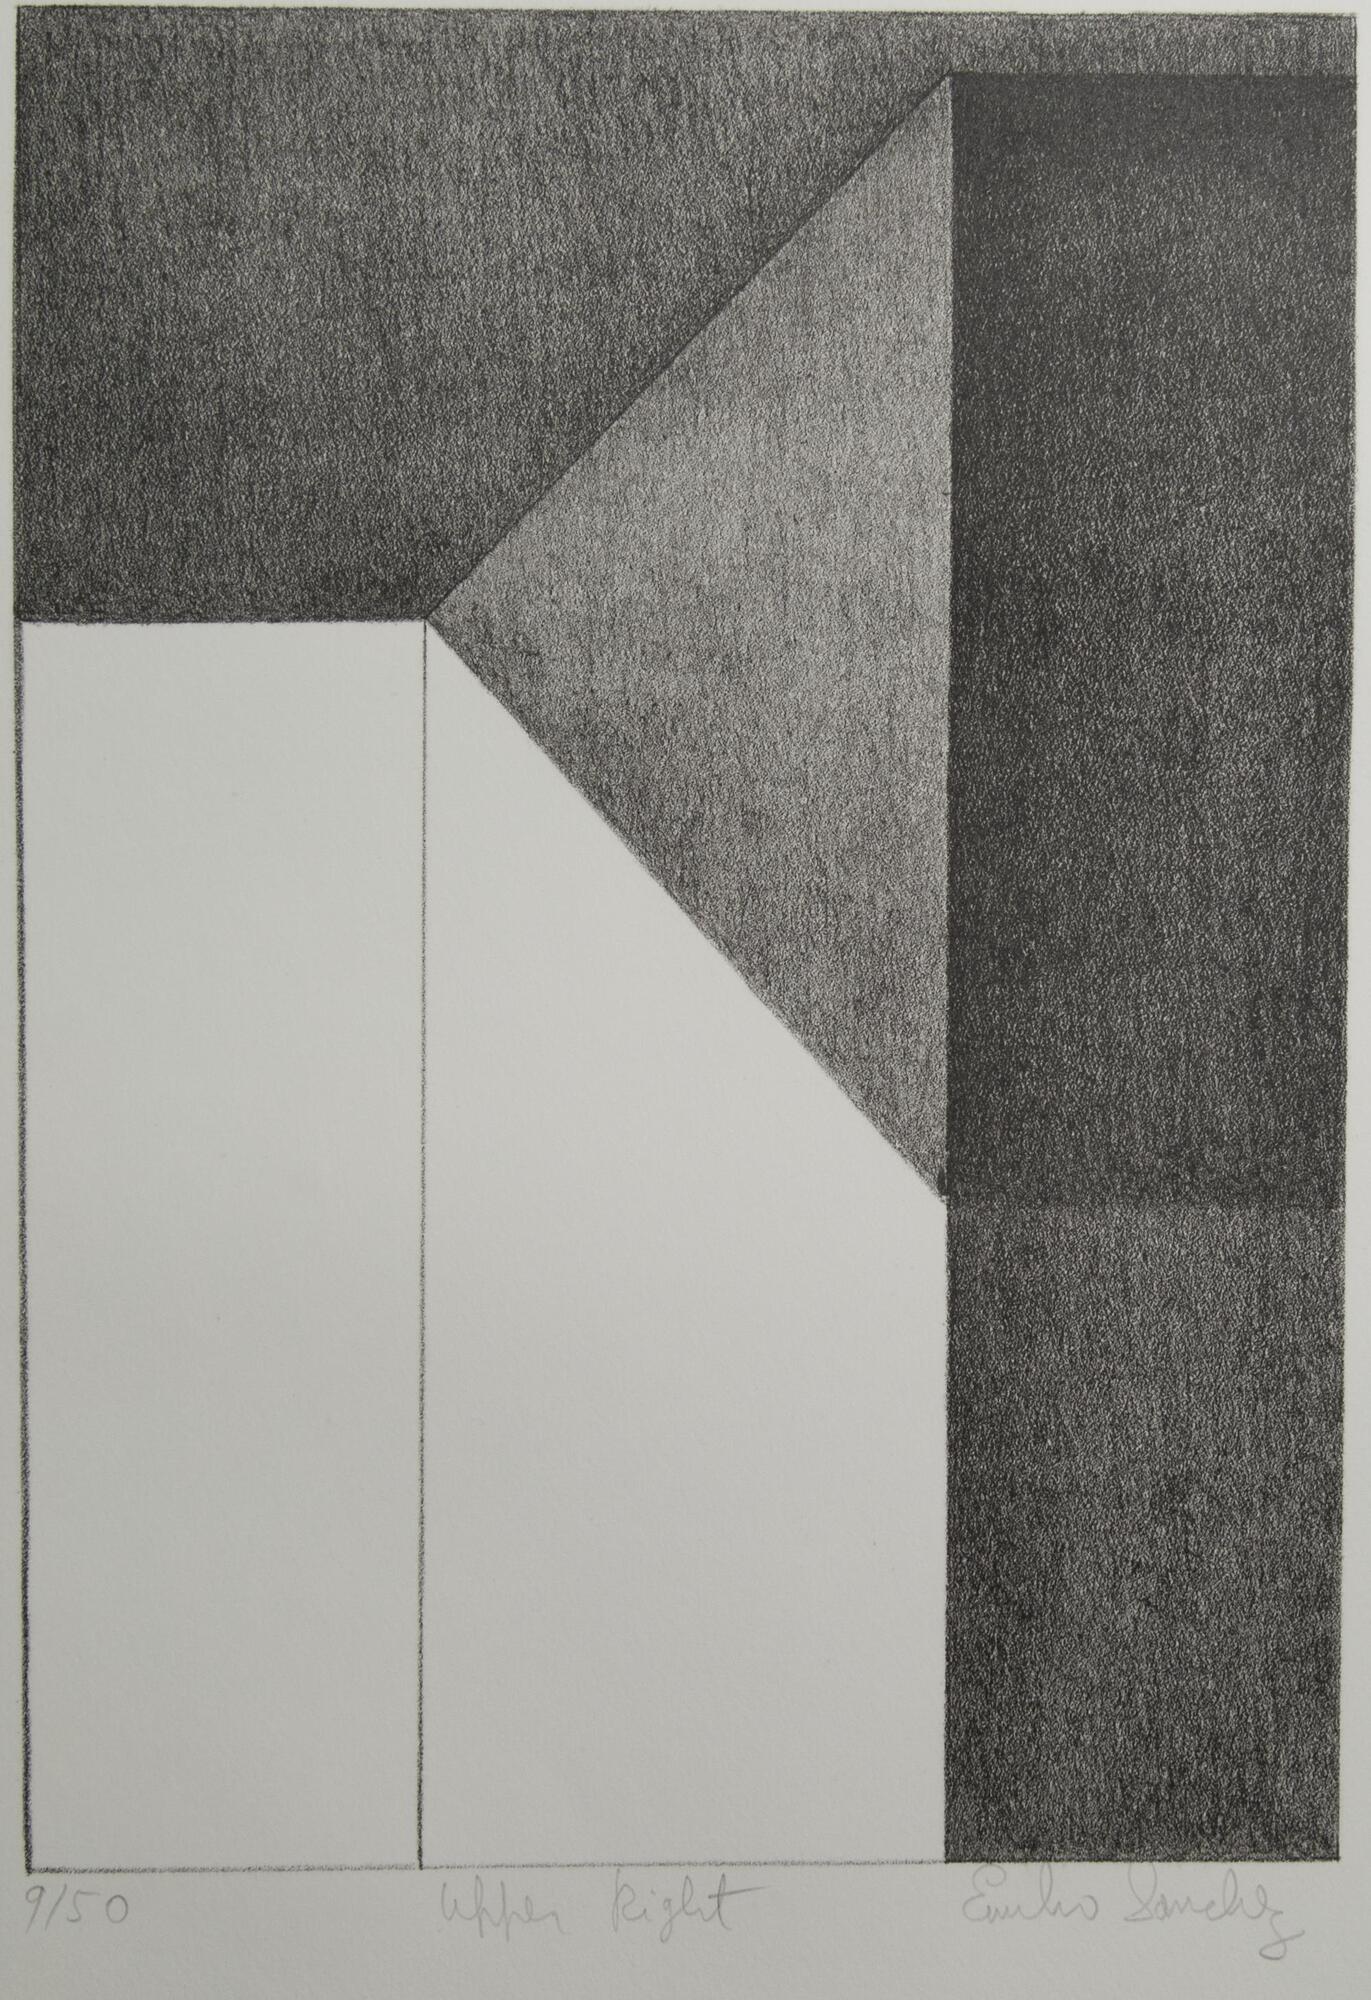 A black and white print of two corners. One is partially covered by a shadow.